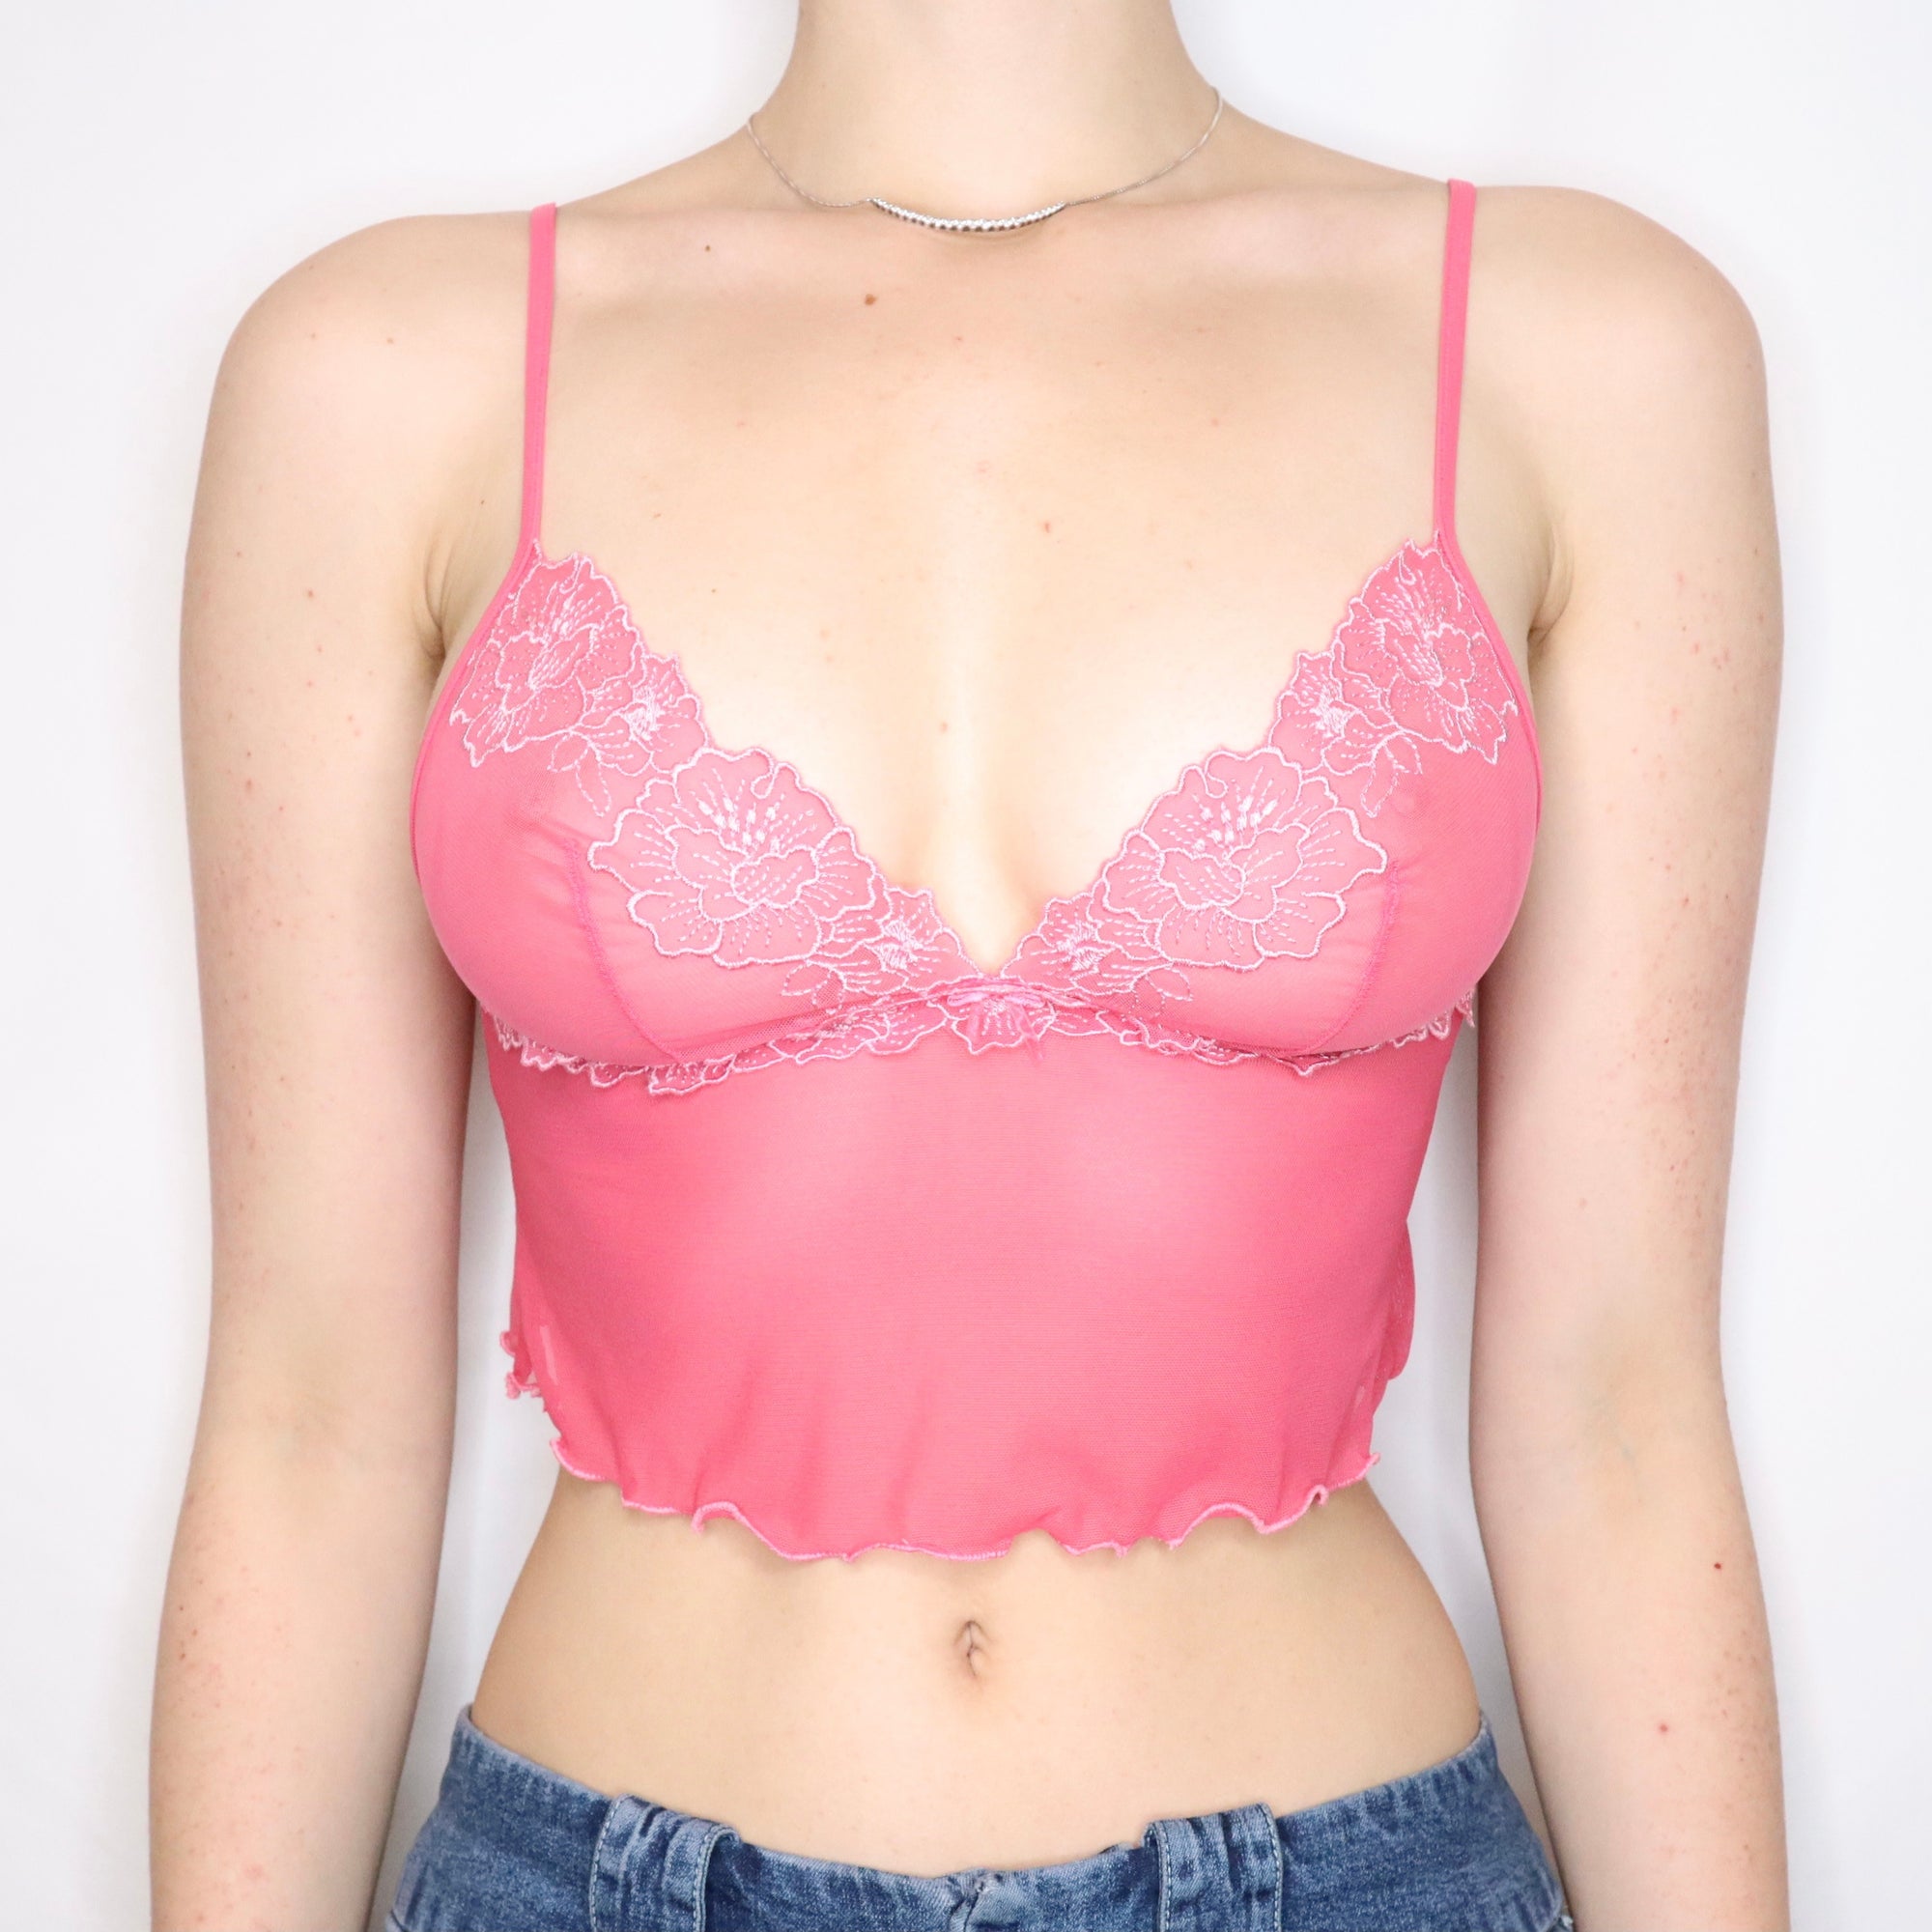 Vintage Early 2000s Sheer Pink Mesh Cropped Cami